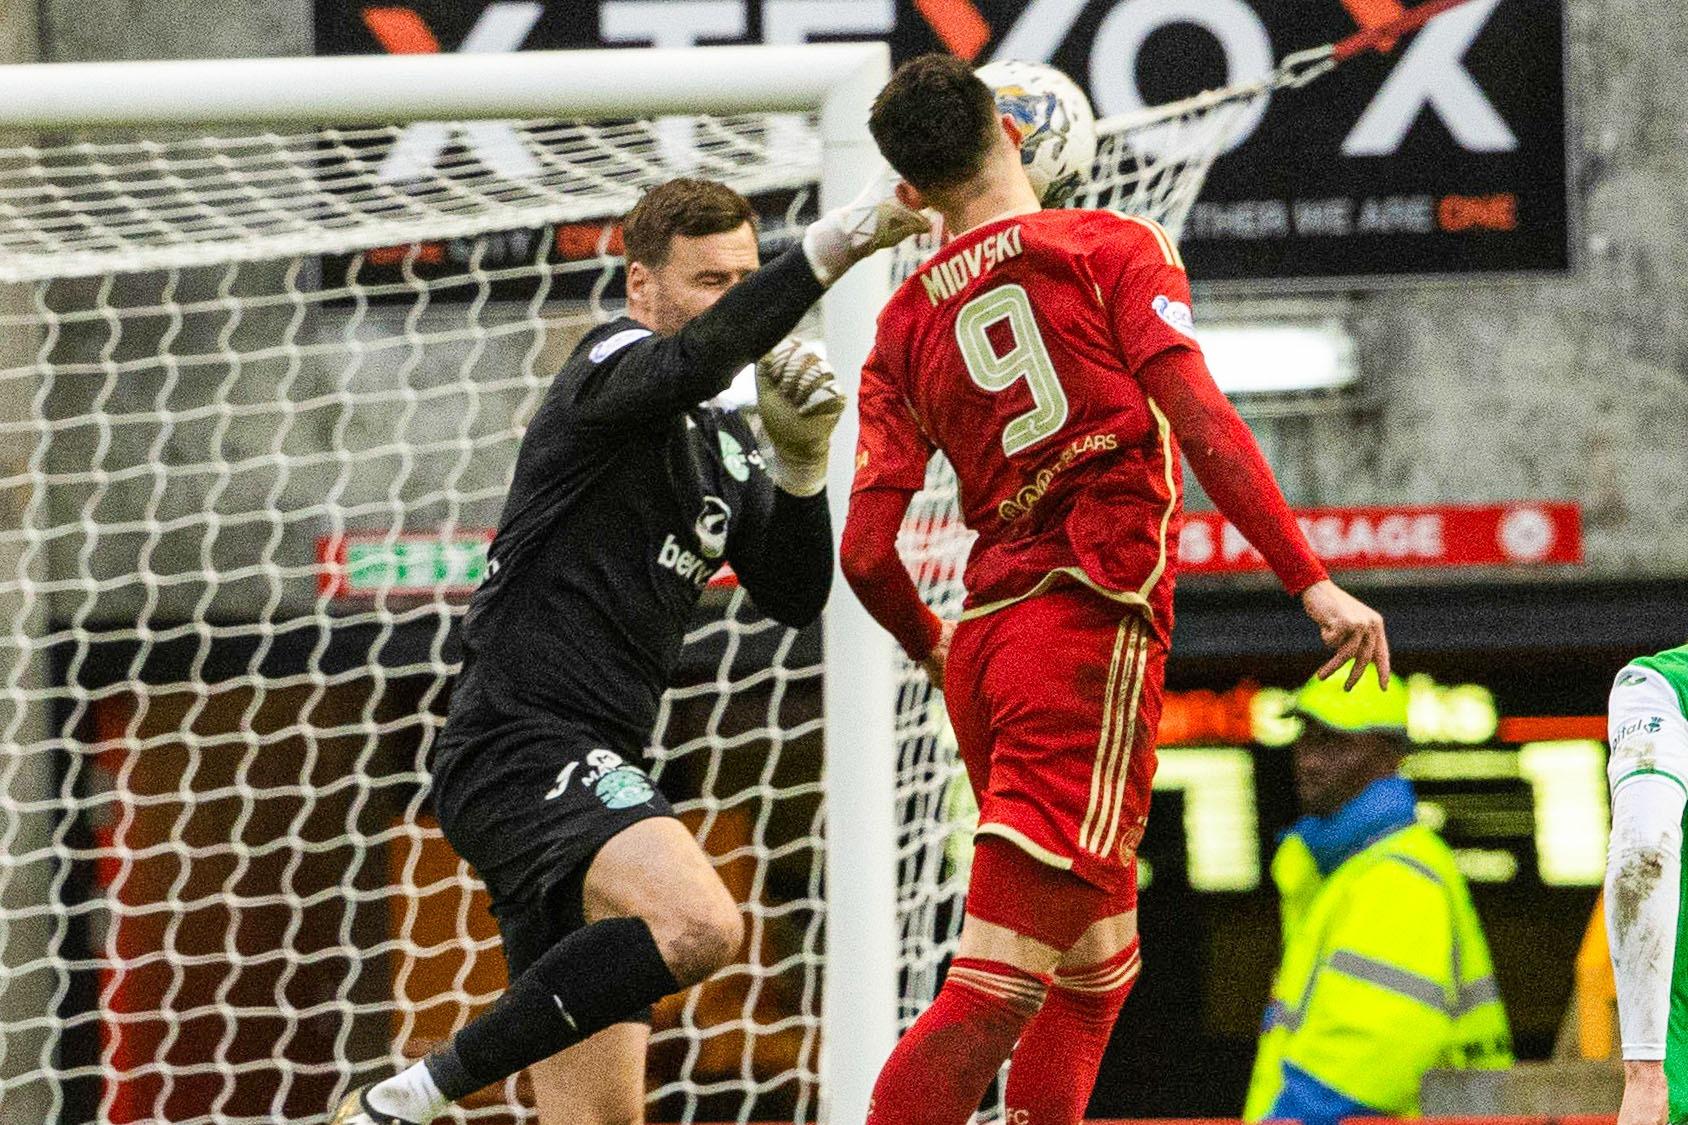 aberdeen and hibs left bewildered by refereeing calls in 2-2 draw - 'he’s poleaxed him'